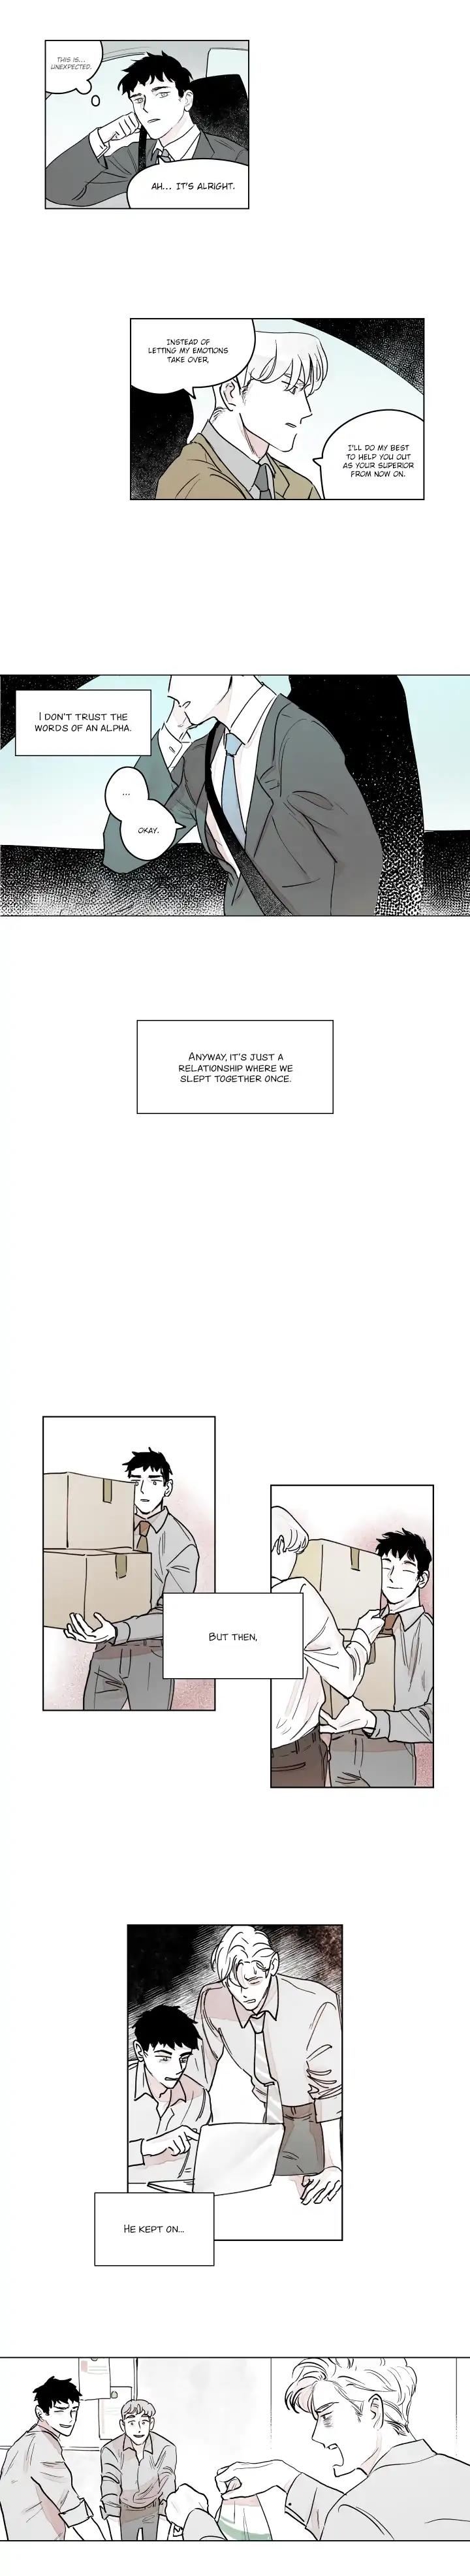 Restless - Page 4